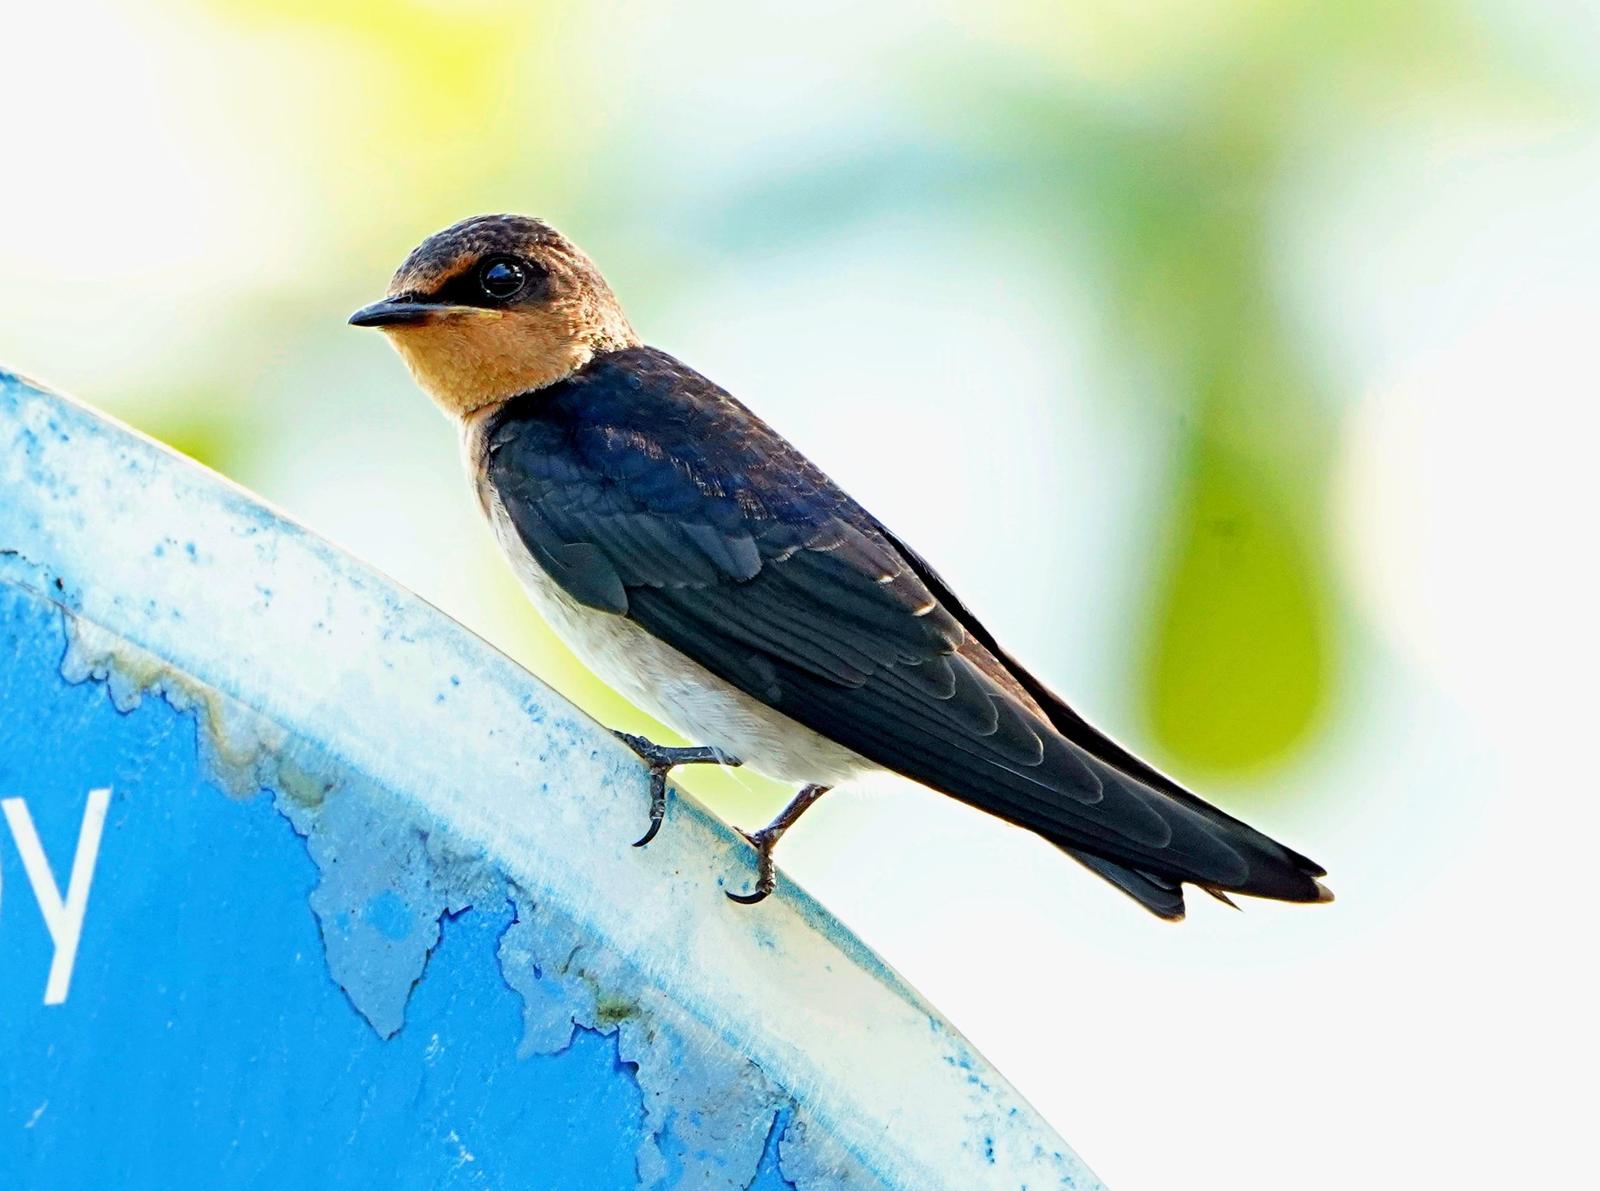 Pacific Swallow Photo by Steven Cheong